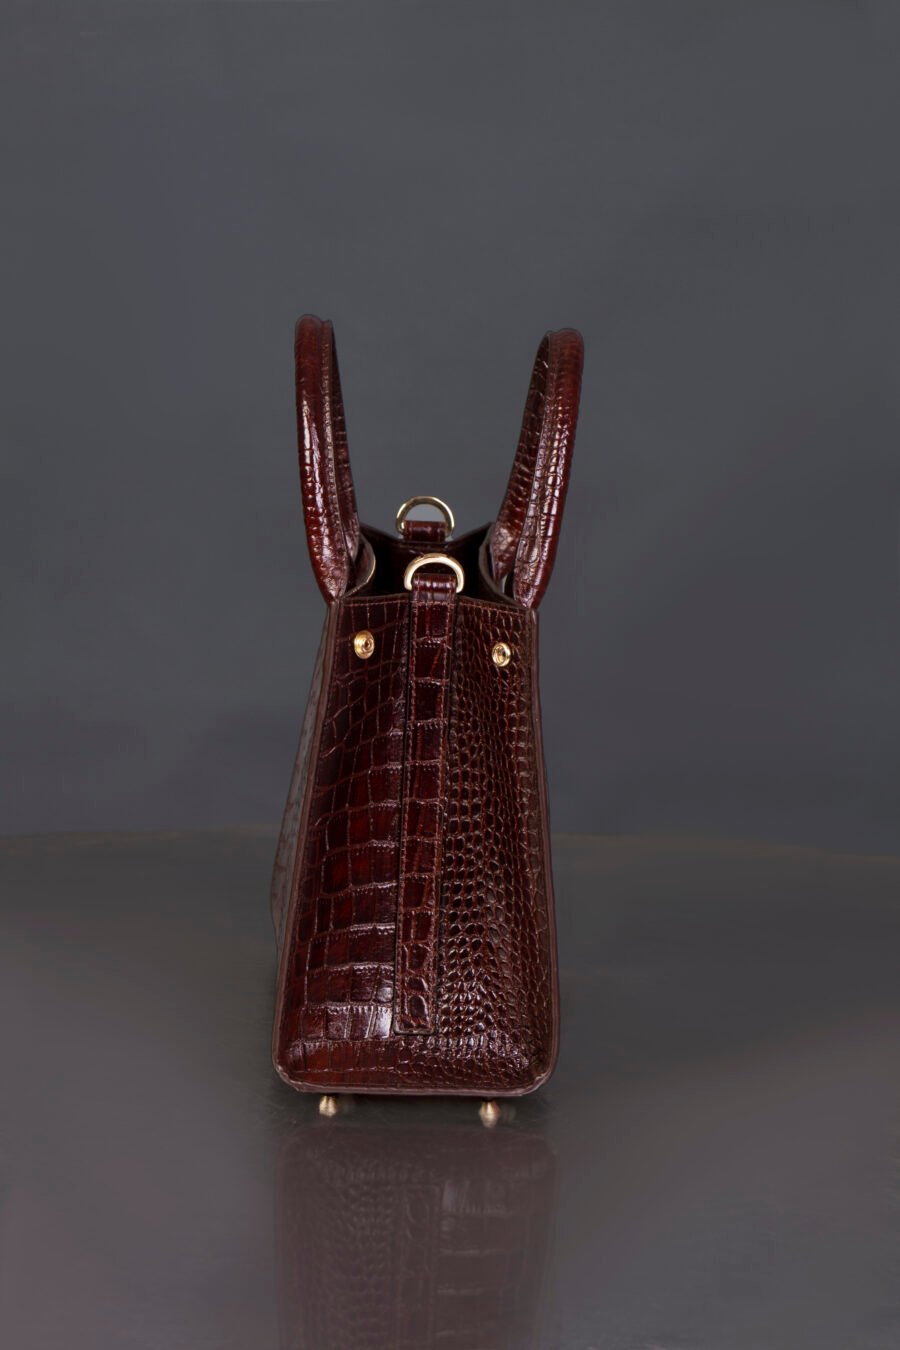 brown tote croco leather bag